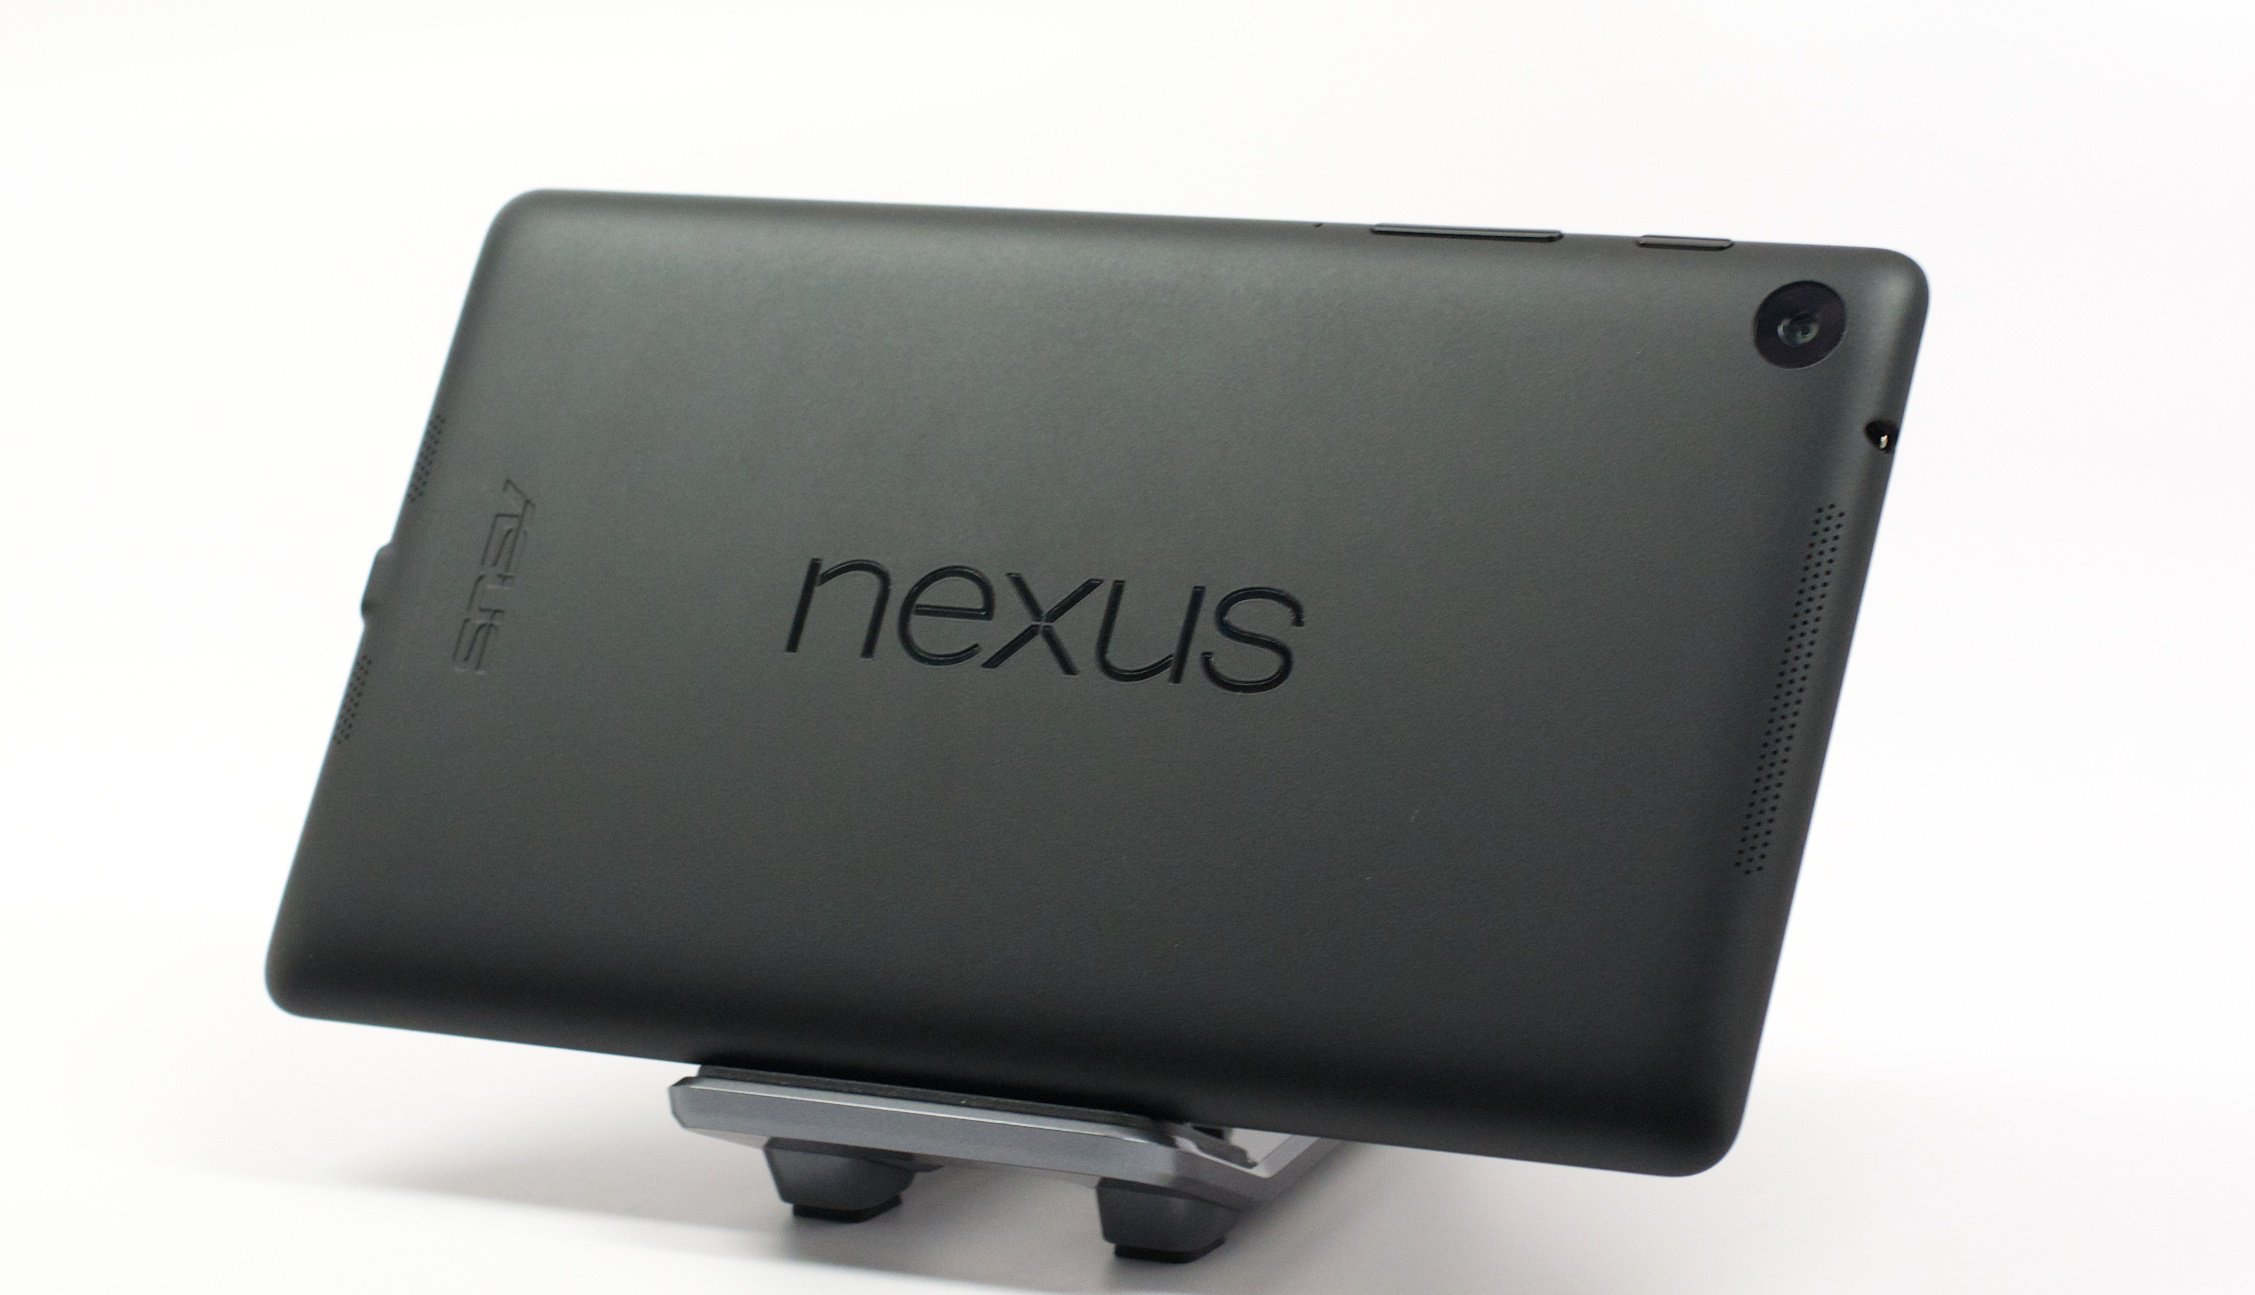 Read our Nexus 7 2013 Android 5.1.1 review to find out if this is safe to install.